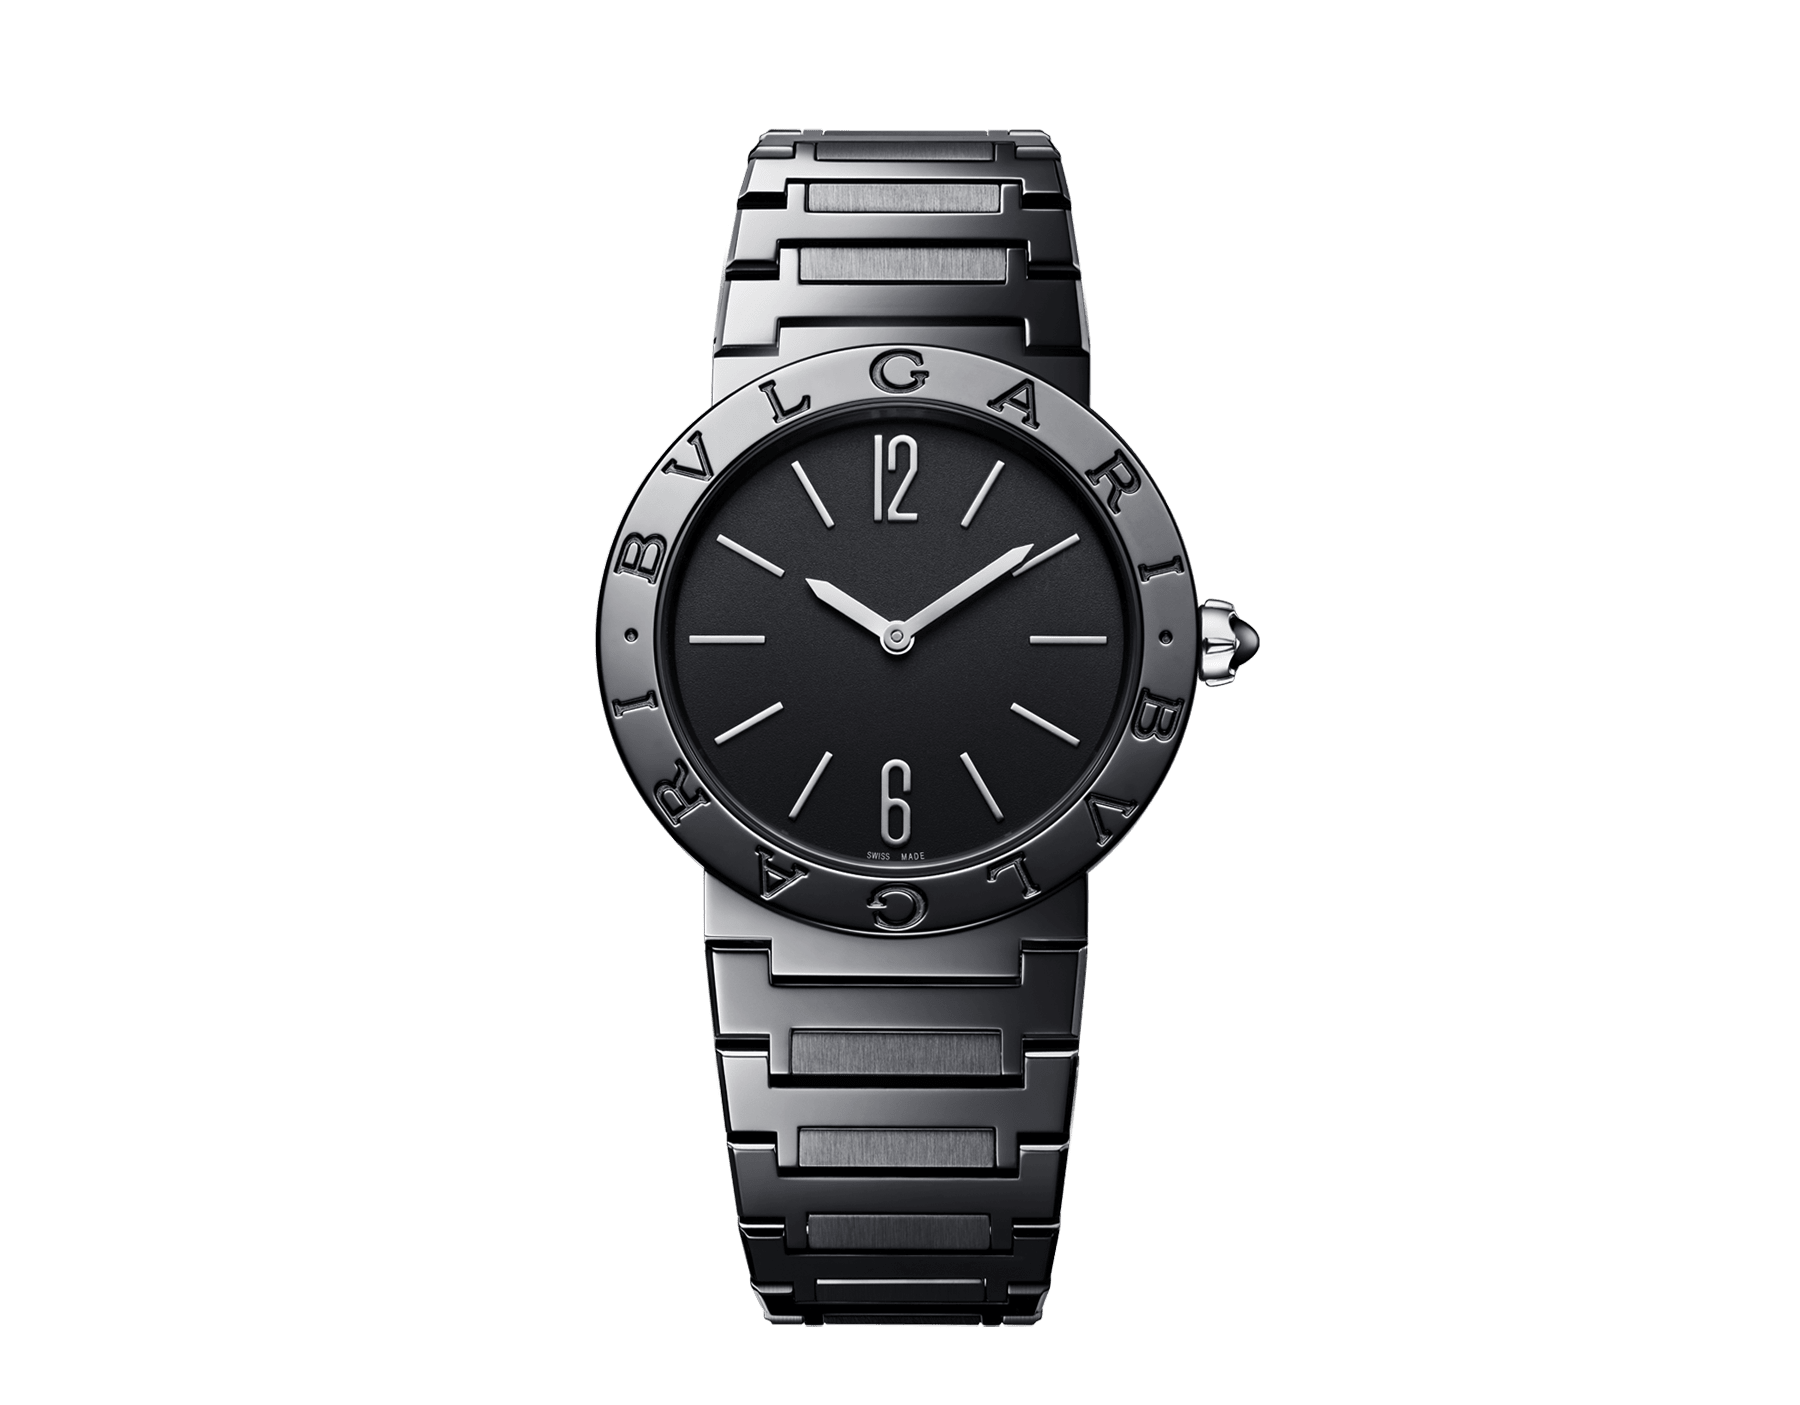 BVLGARI BVLGARI LADY watch with stainless steel case and bracelet with black DLC treatment, bezel engraved with double logo and black lacquered dial. Water-resistant up to 30 metres 103557 image 1